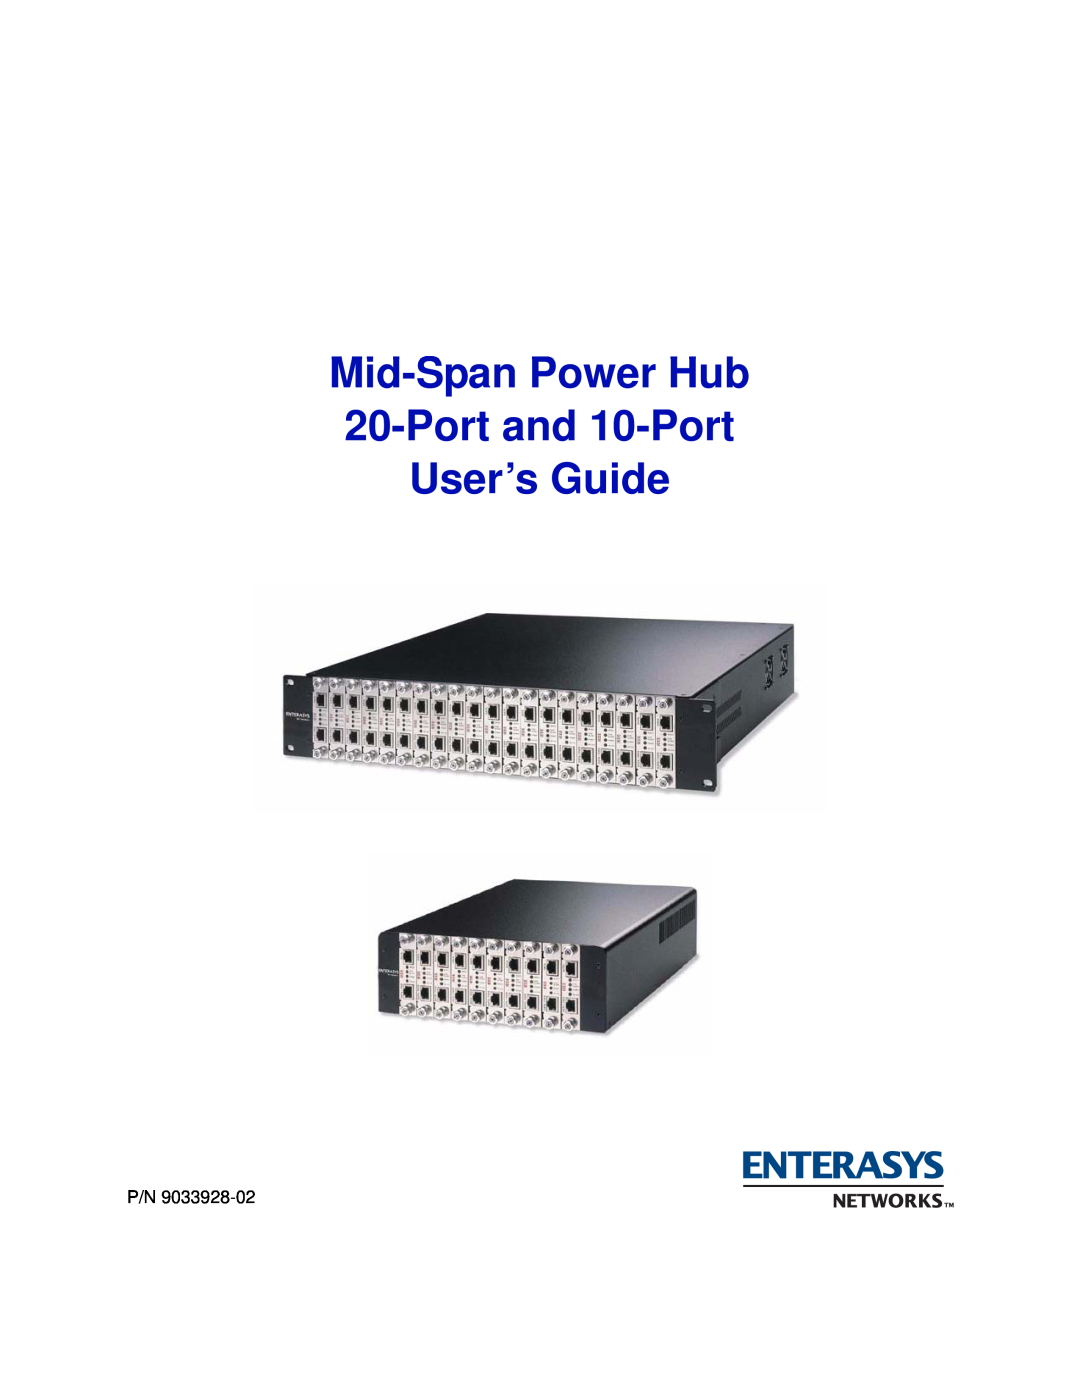 Enterasys Networks BL-89520ENT, BL-89720ENT, BL-89620ENT manual Mid-Span Power Hub 20-Port and 10-Port User’s Guide, Title 